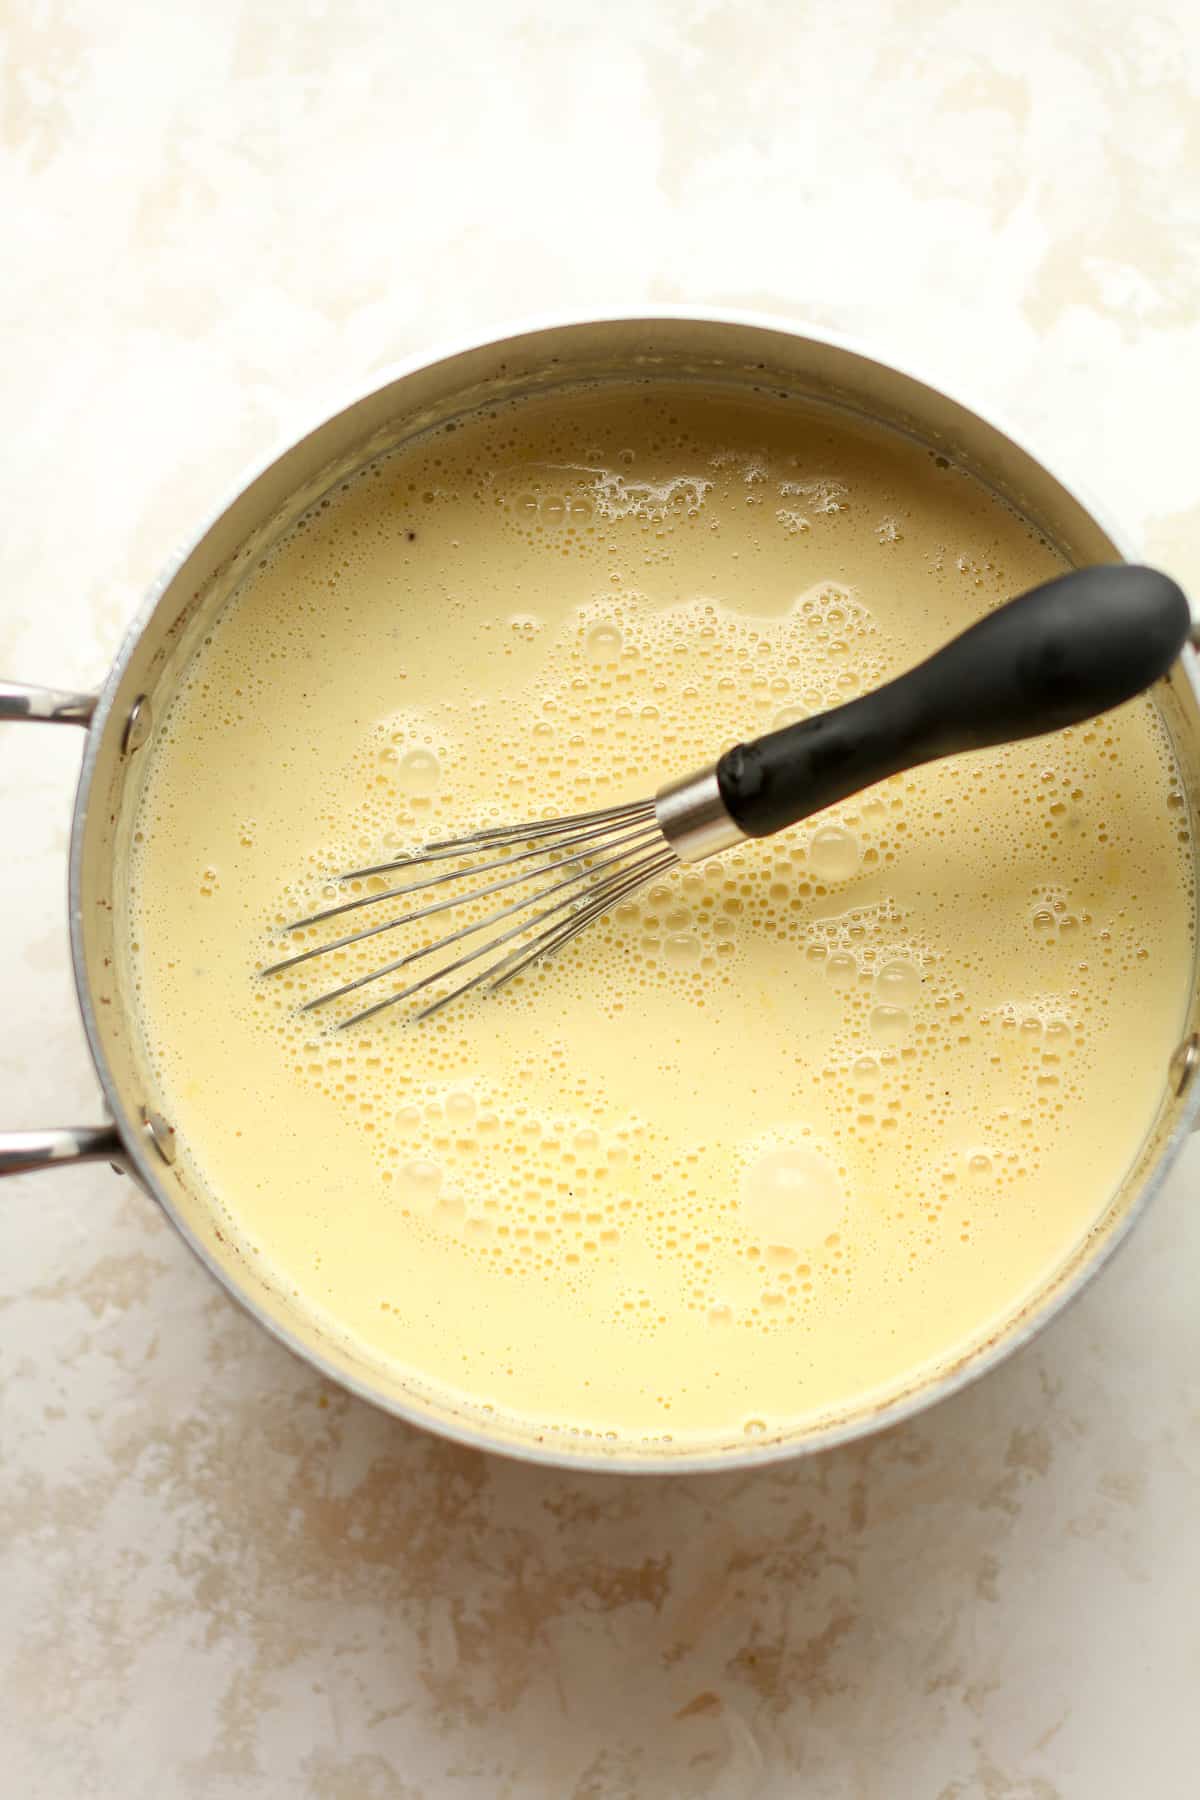 A pan of just made homemade eggnog with a whisk.